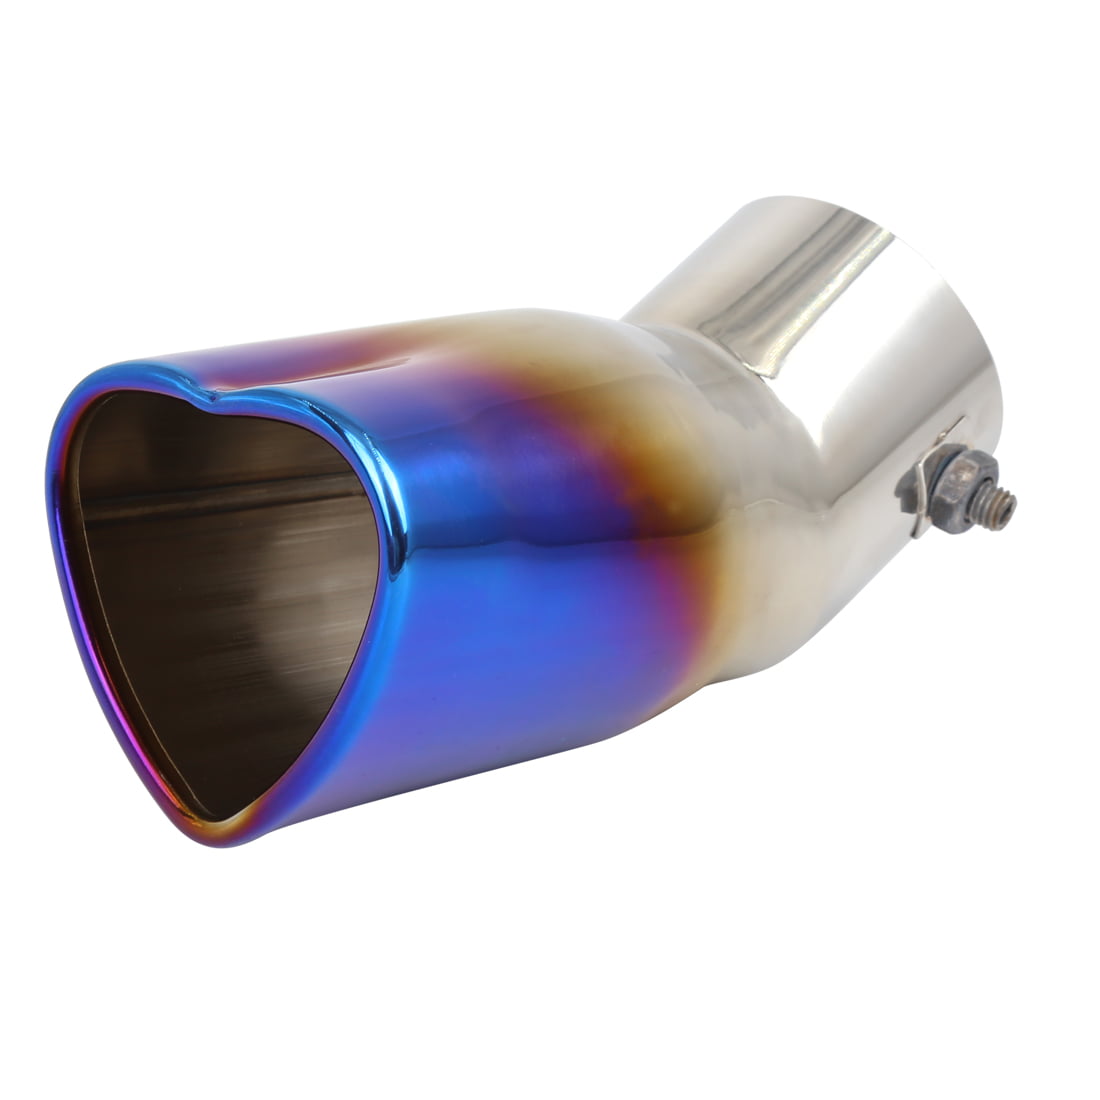 Heart Shaped Exhaust Pipe - www.inf-inet.com